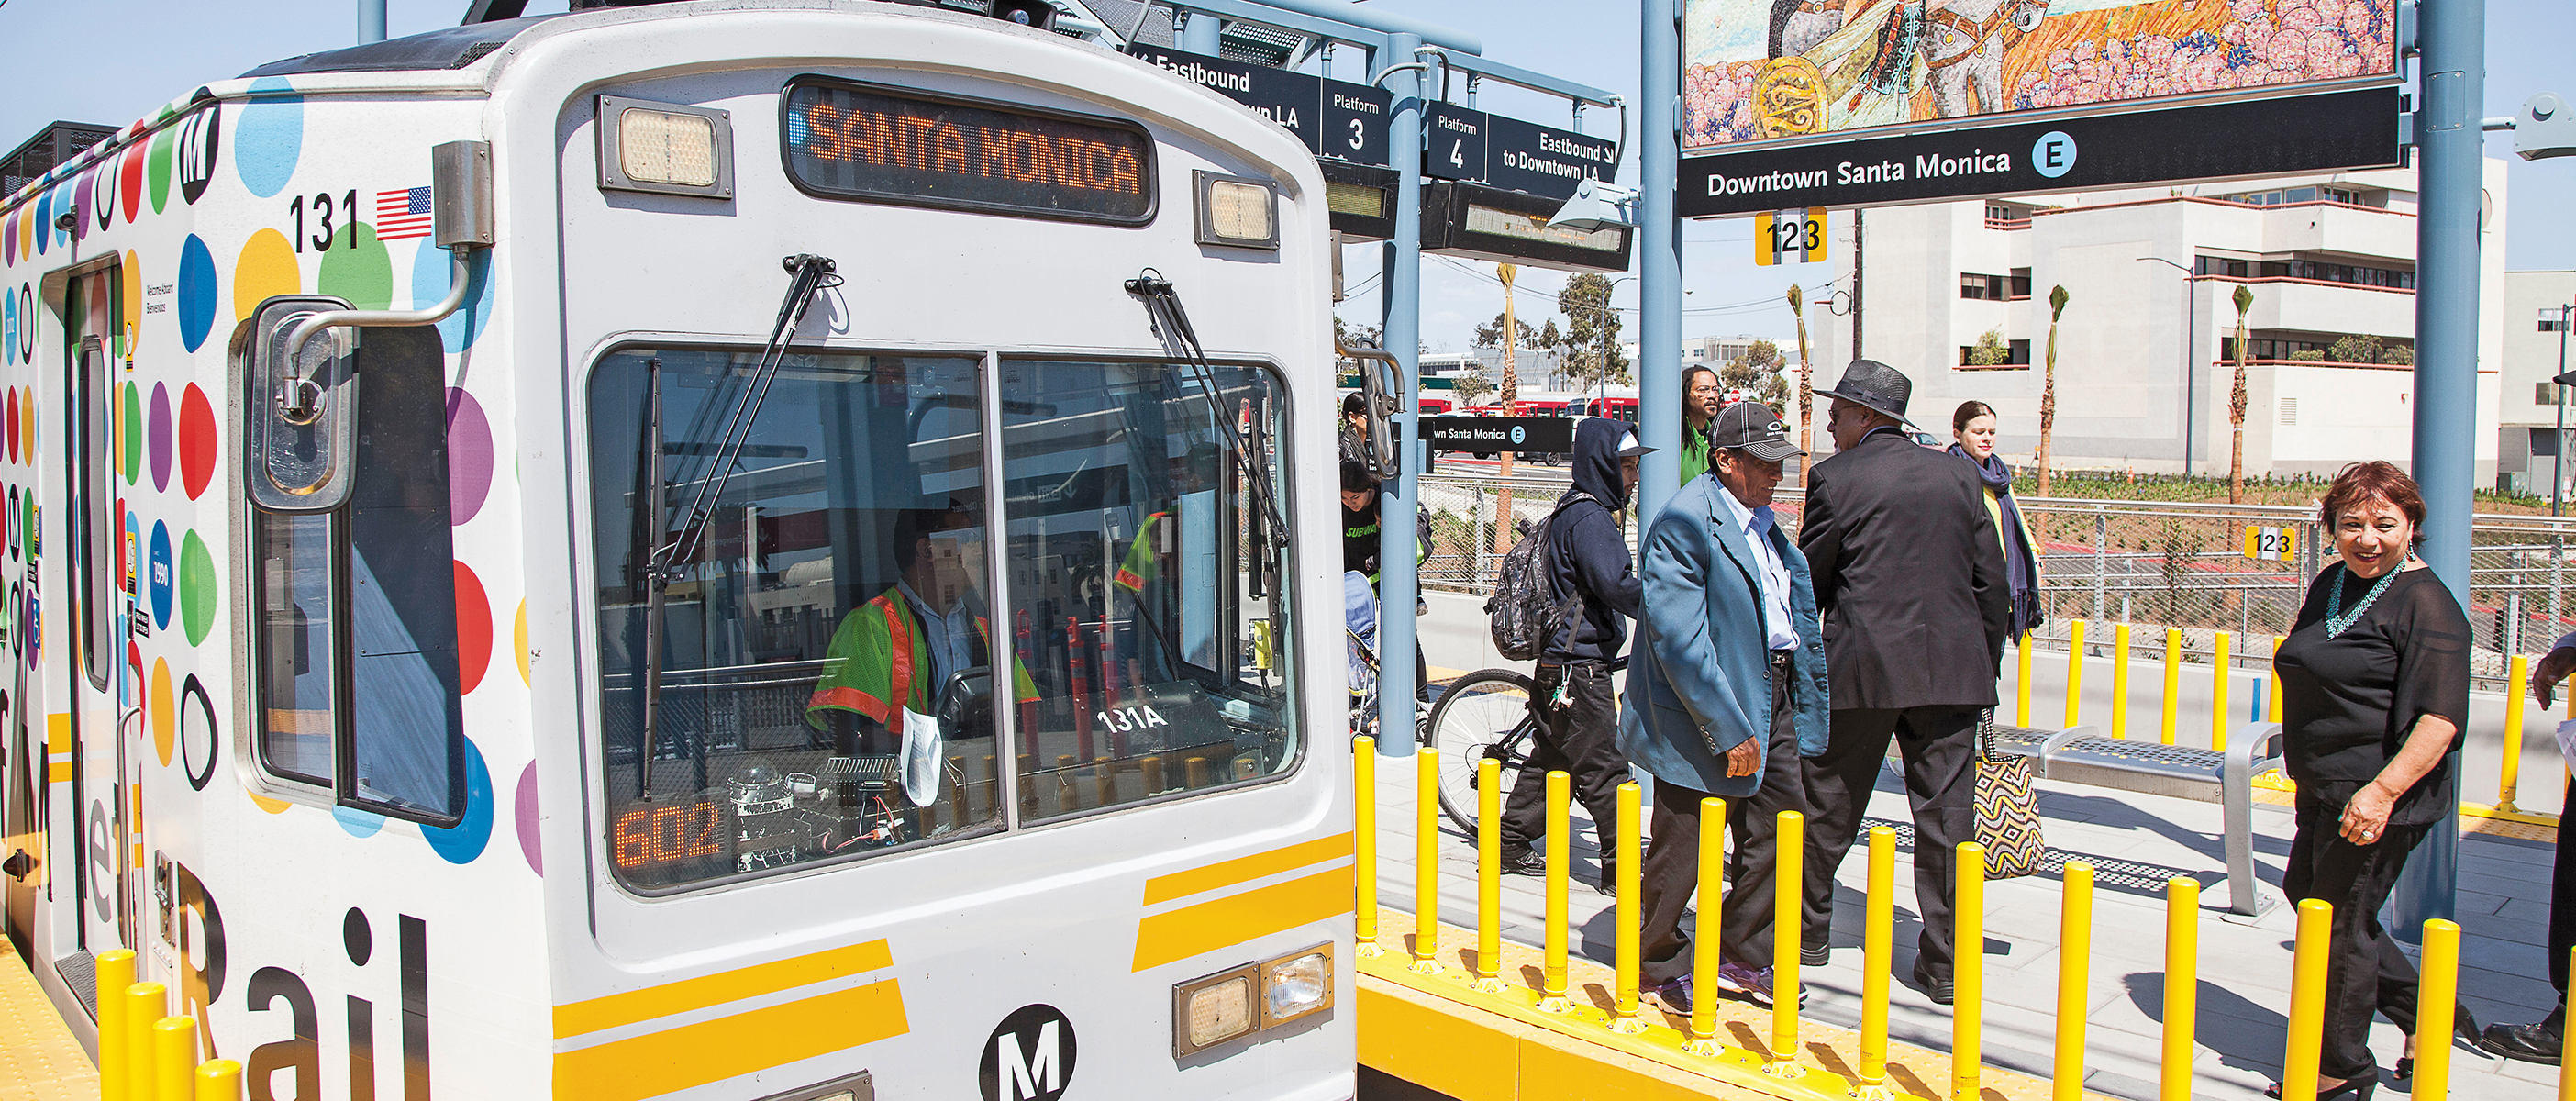 Expo line allows Pierce students to visit the beach using inexpensive public transportation